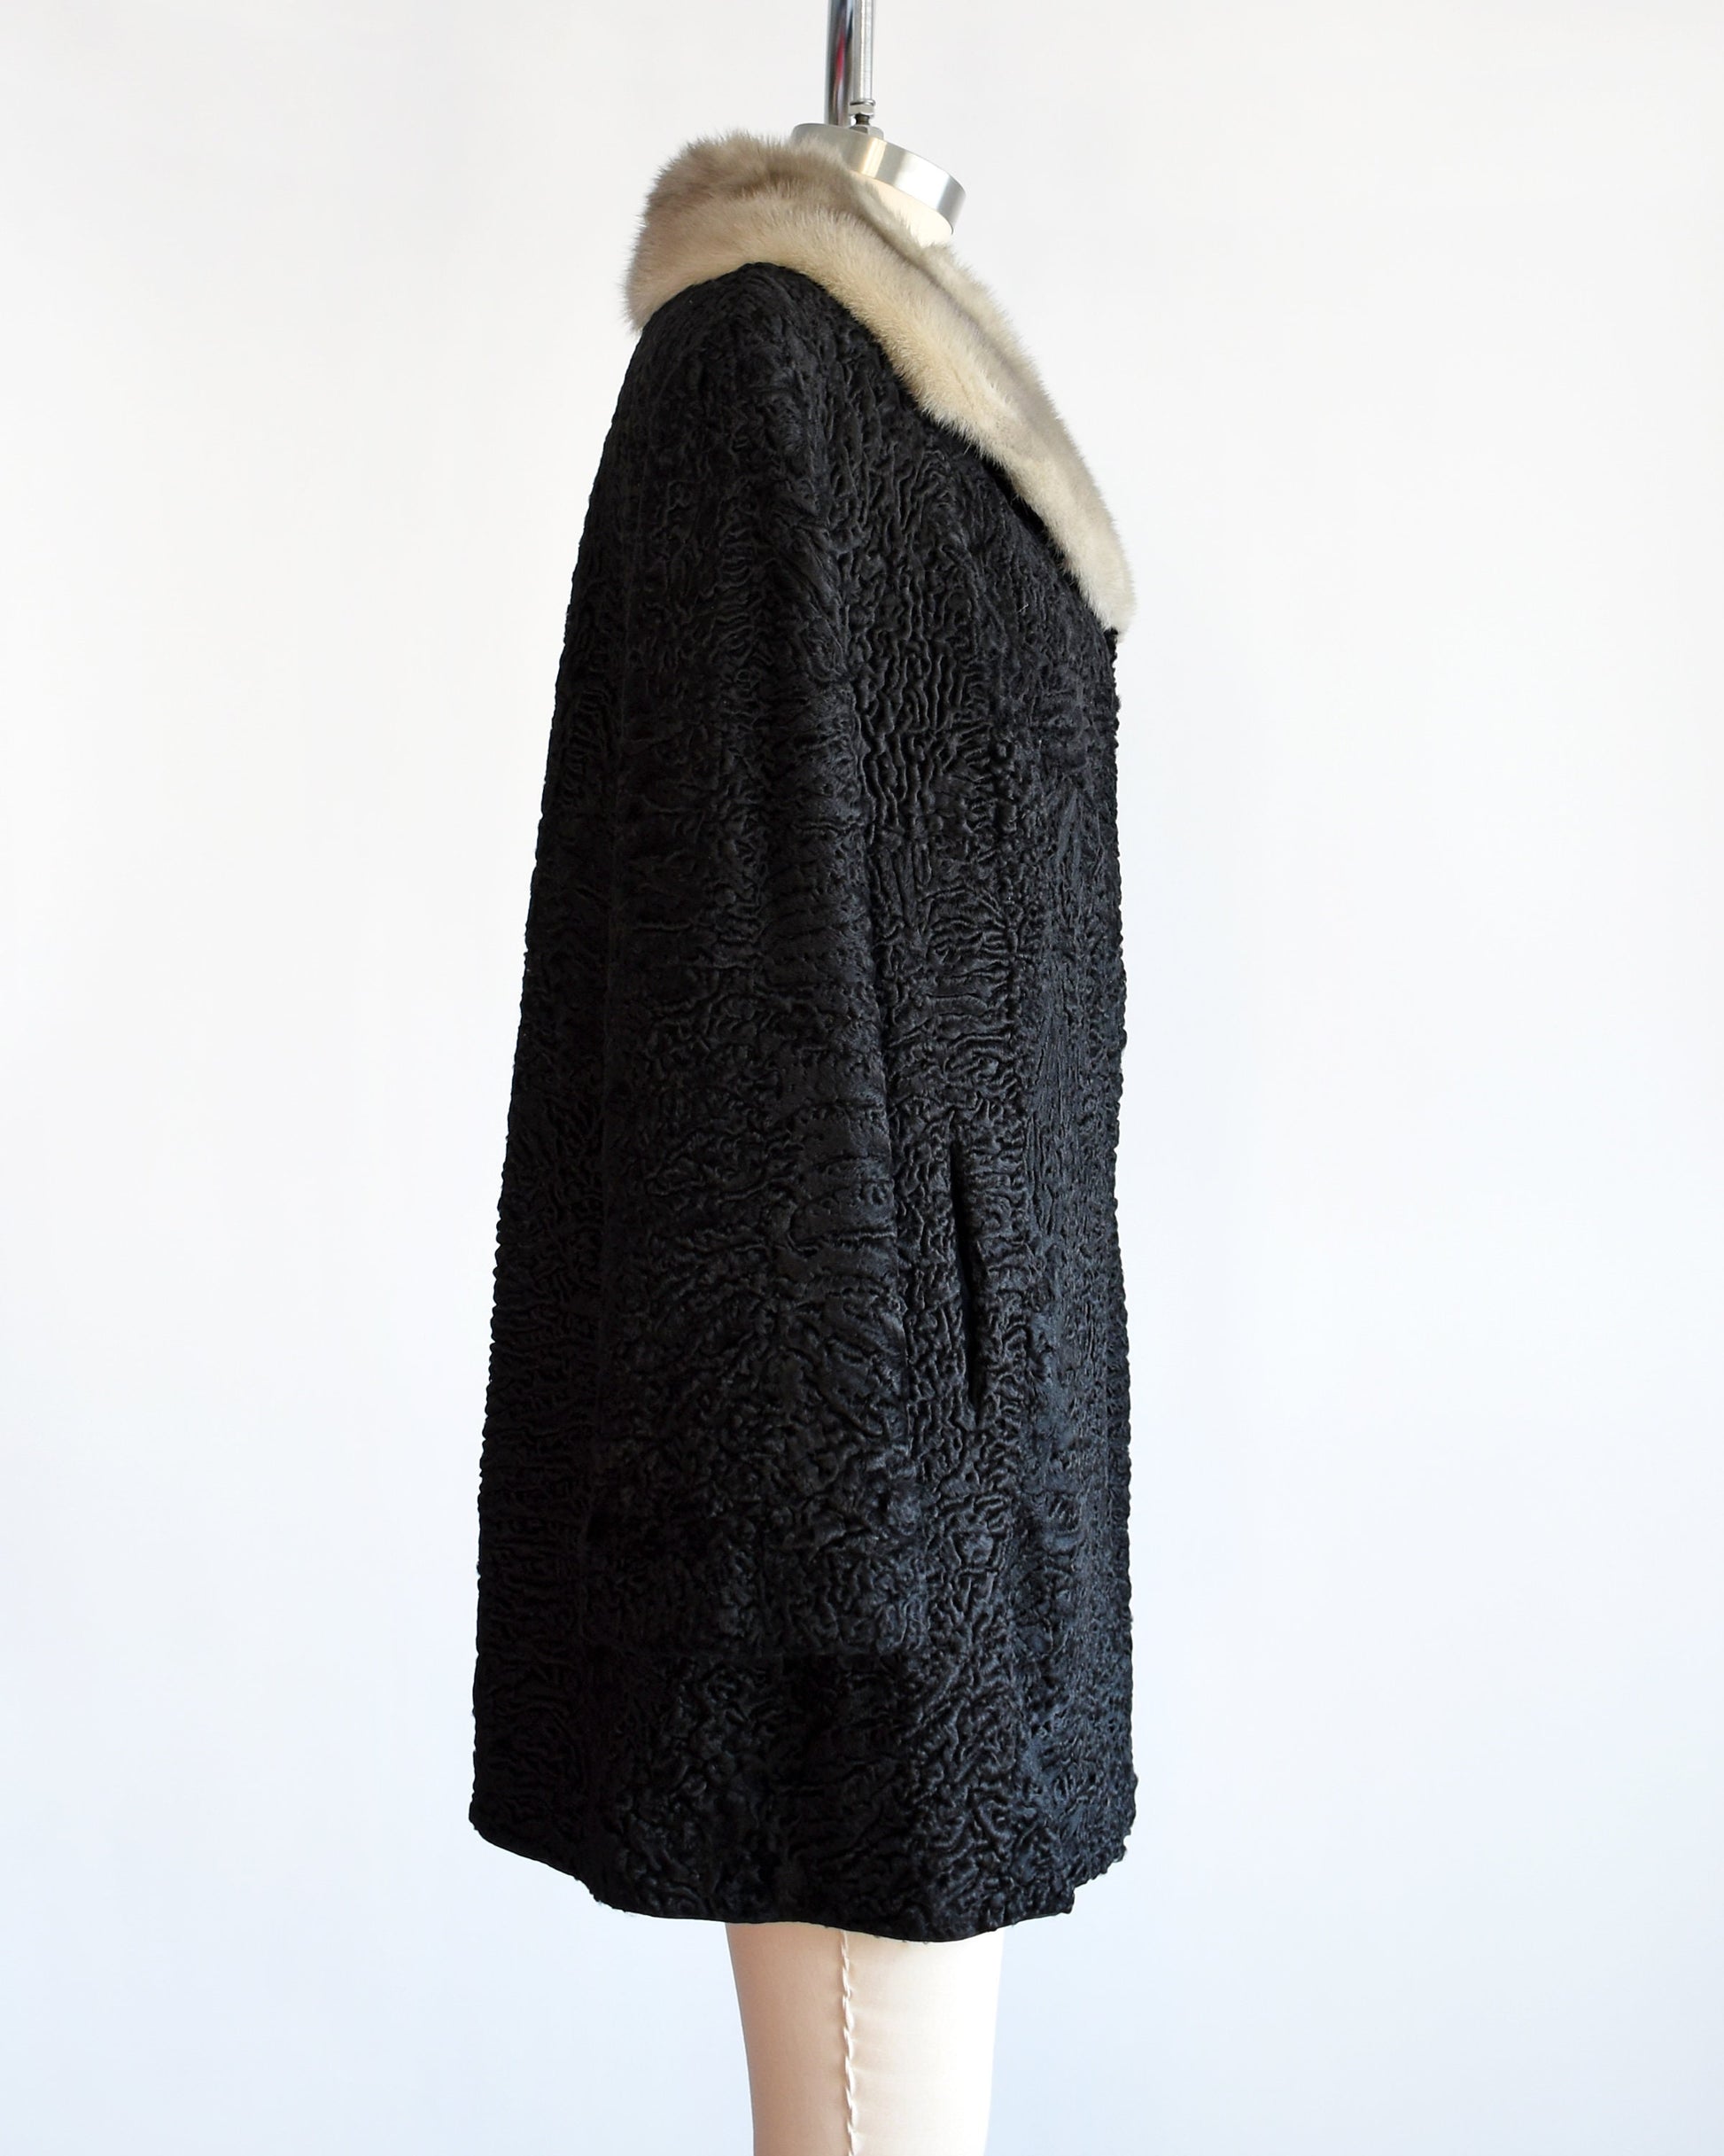 Side view of a vintage late 50s early 60s black curly Persian lamb coat that has a silver gray mink fur collar. Two hidden hook and eye closures down the front. Coat is on a dress form.